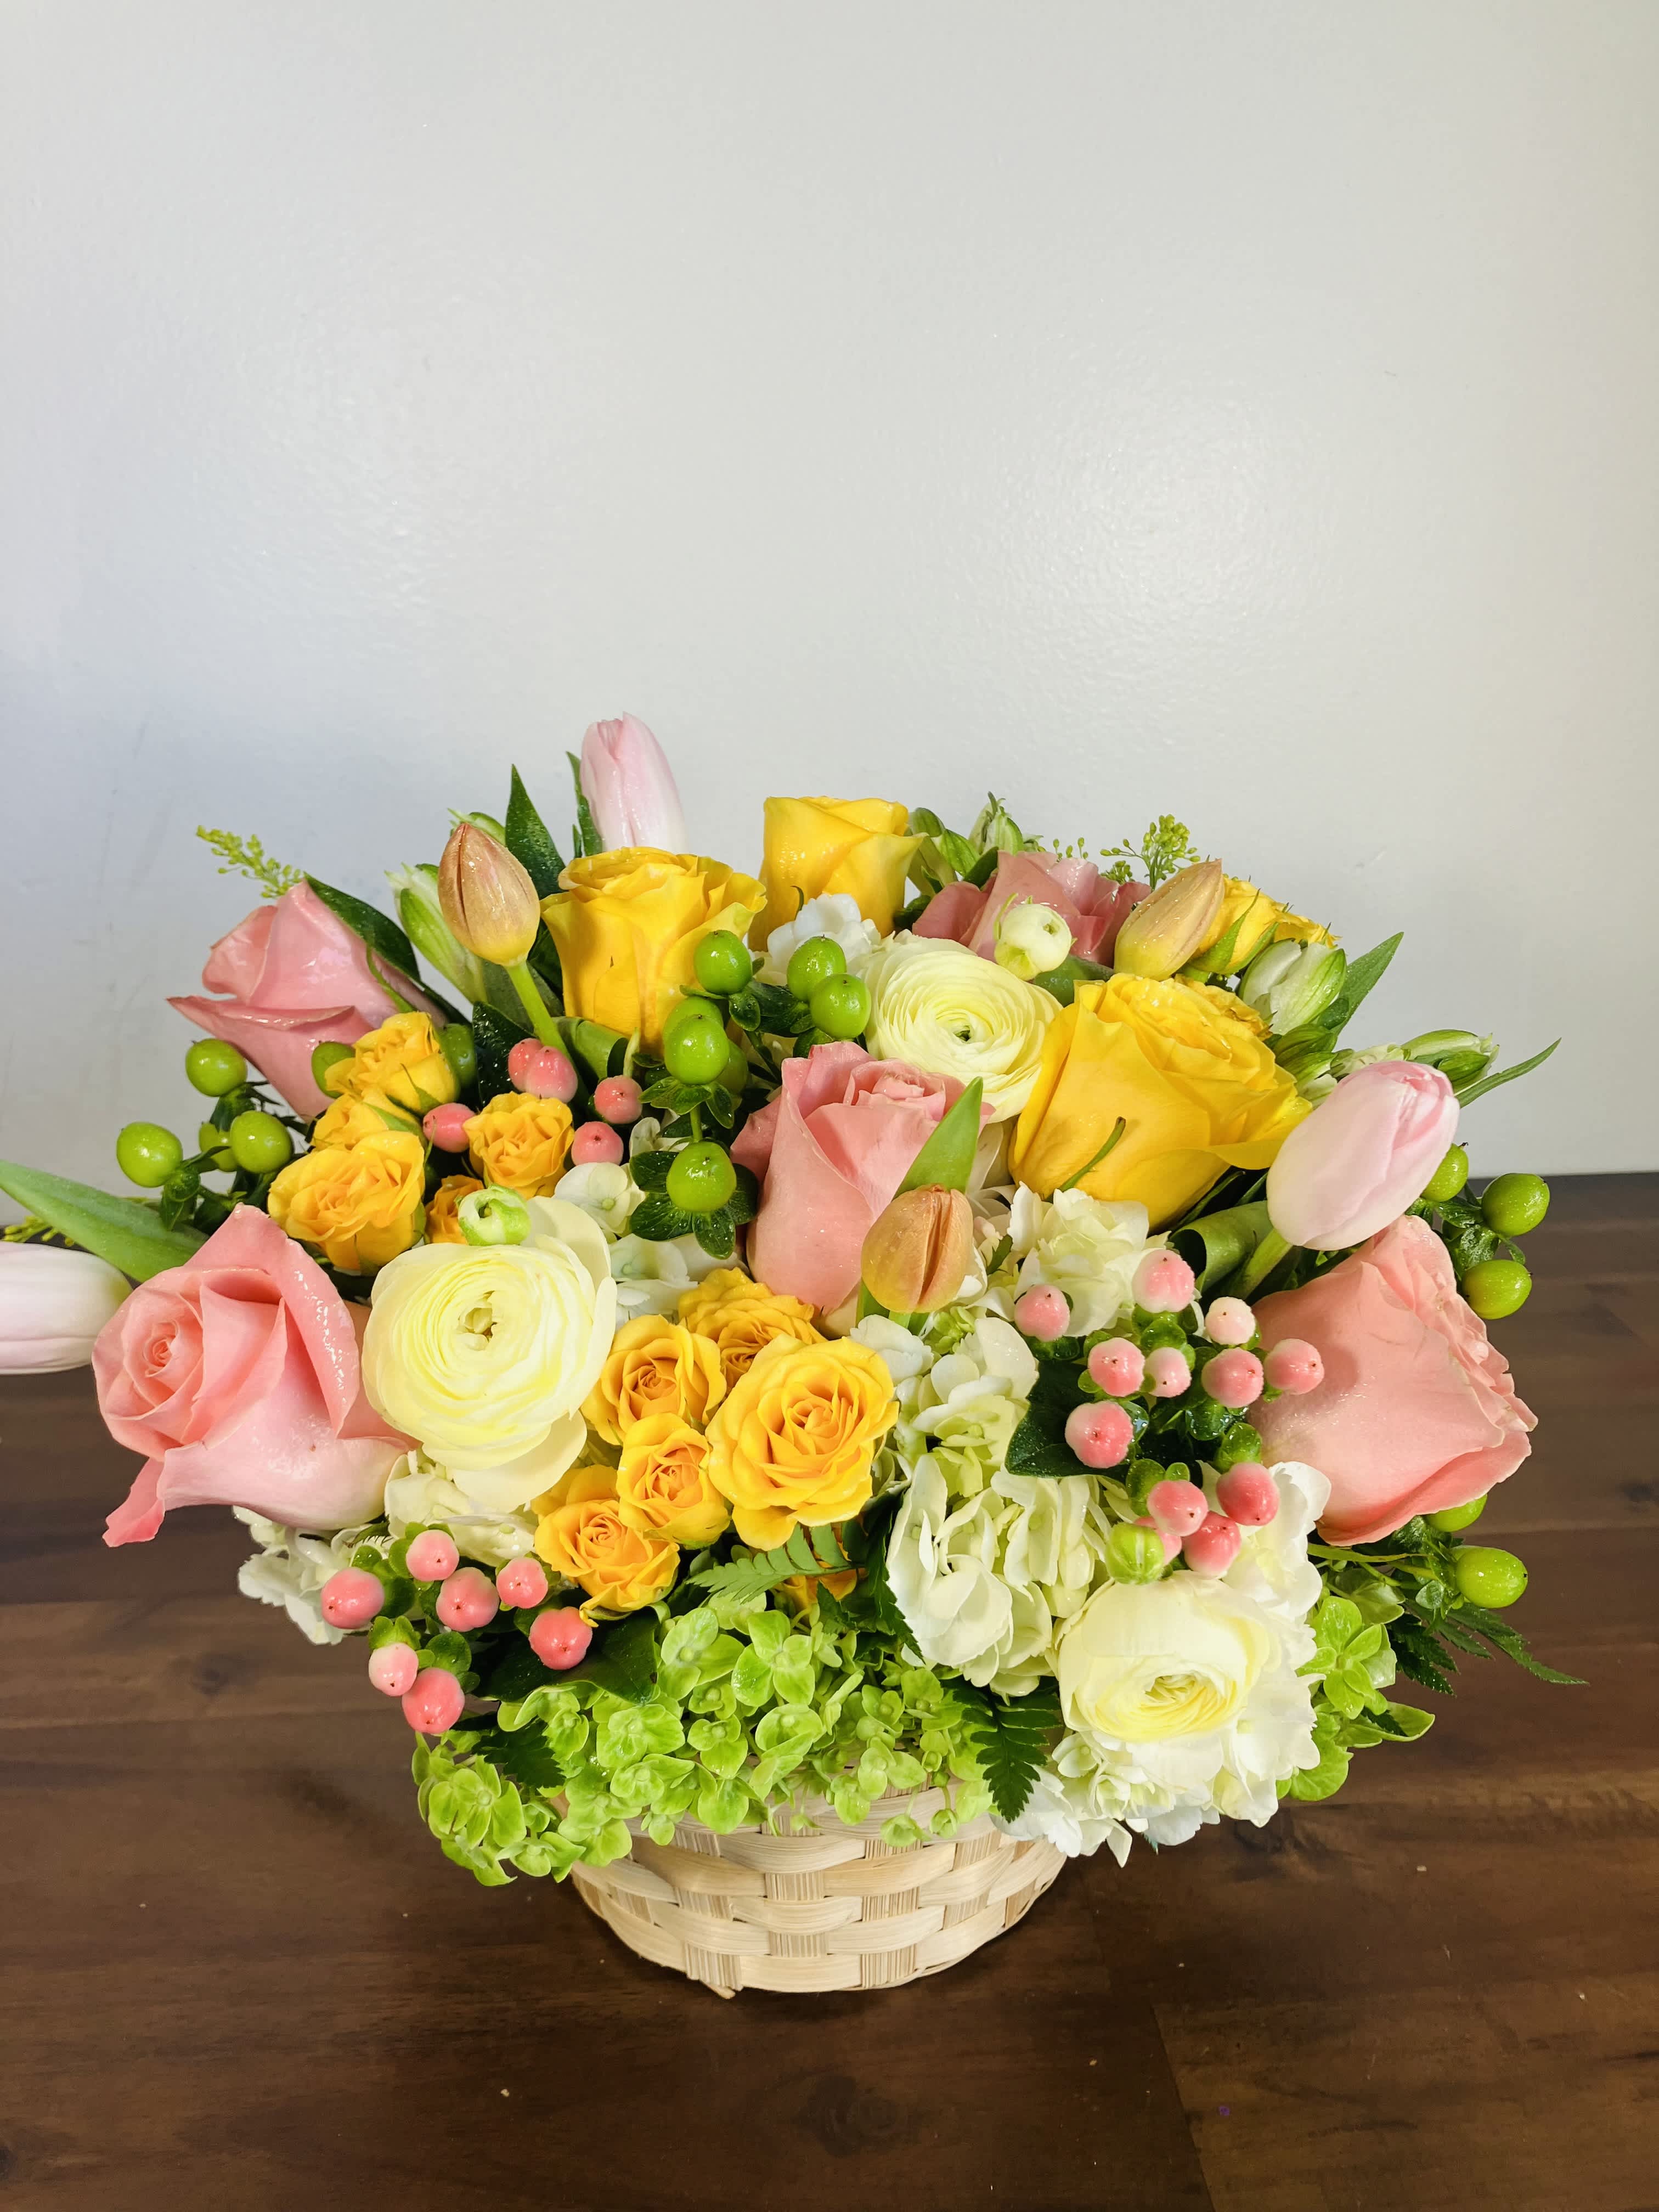 Spring time - Show your love with this  Basket filled with appreciation and elegance, an arrangement that is rich with high-end flowers, European Tulips, Chrysanthemum, Red Coffee Beans, Spray Roses  